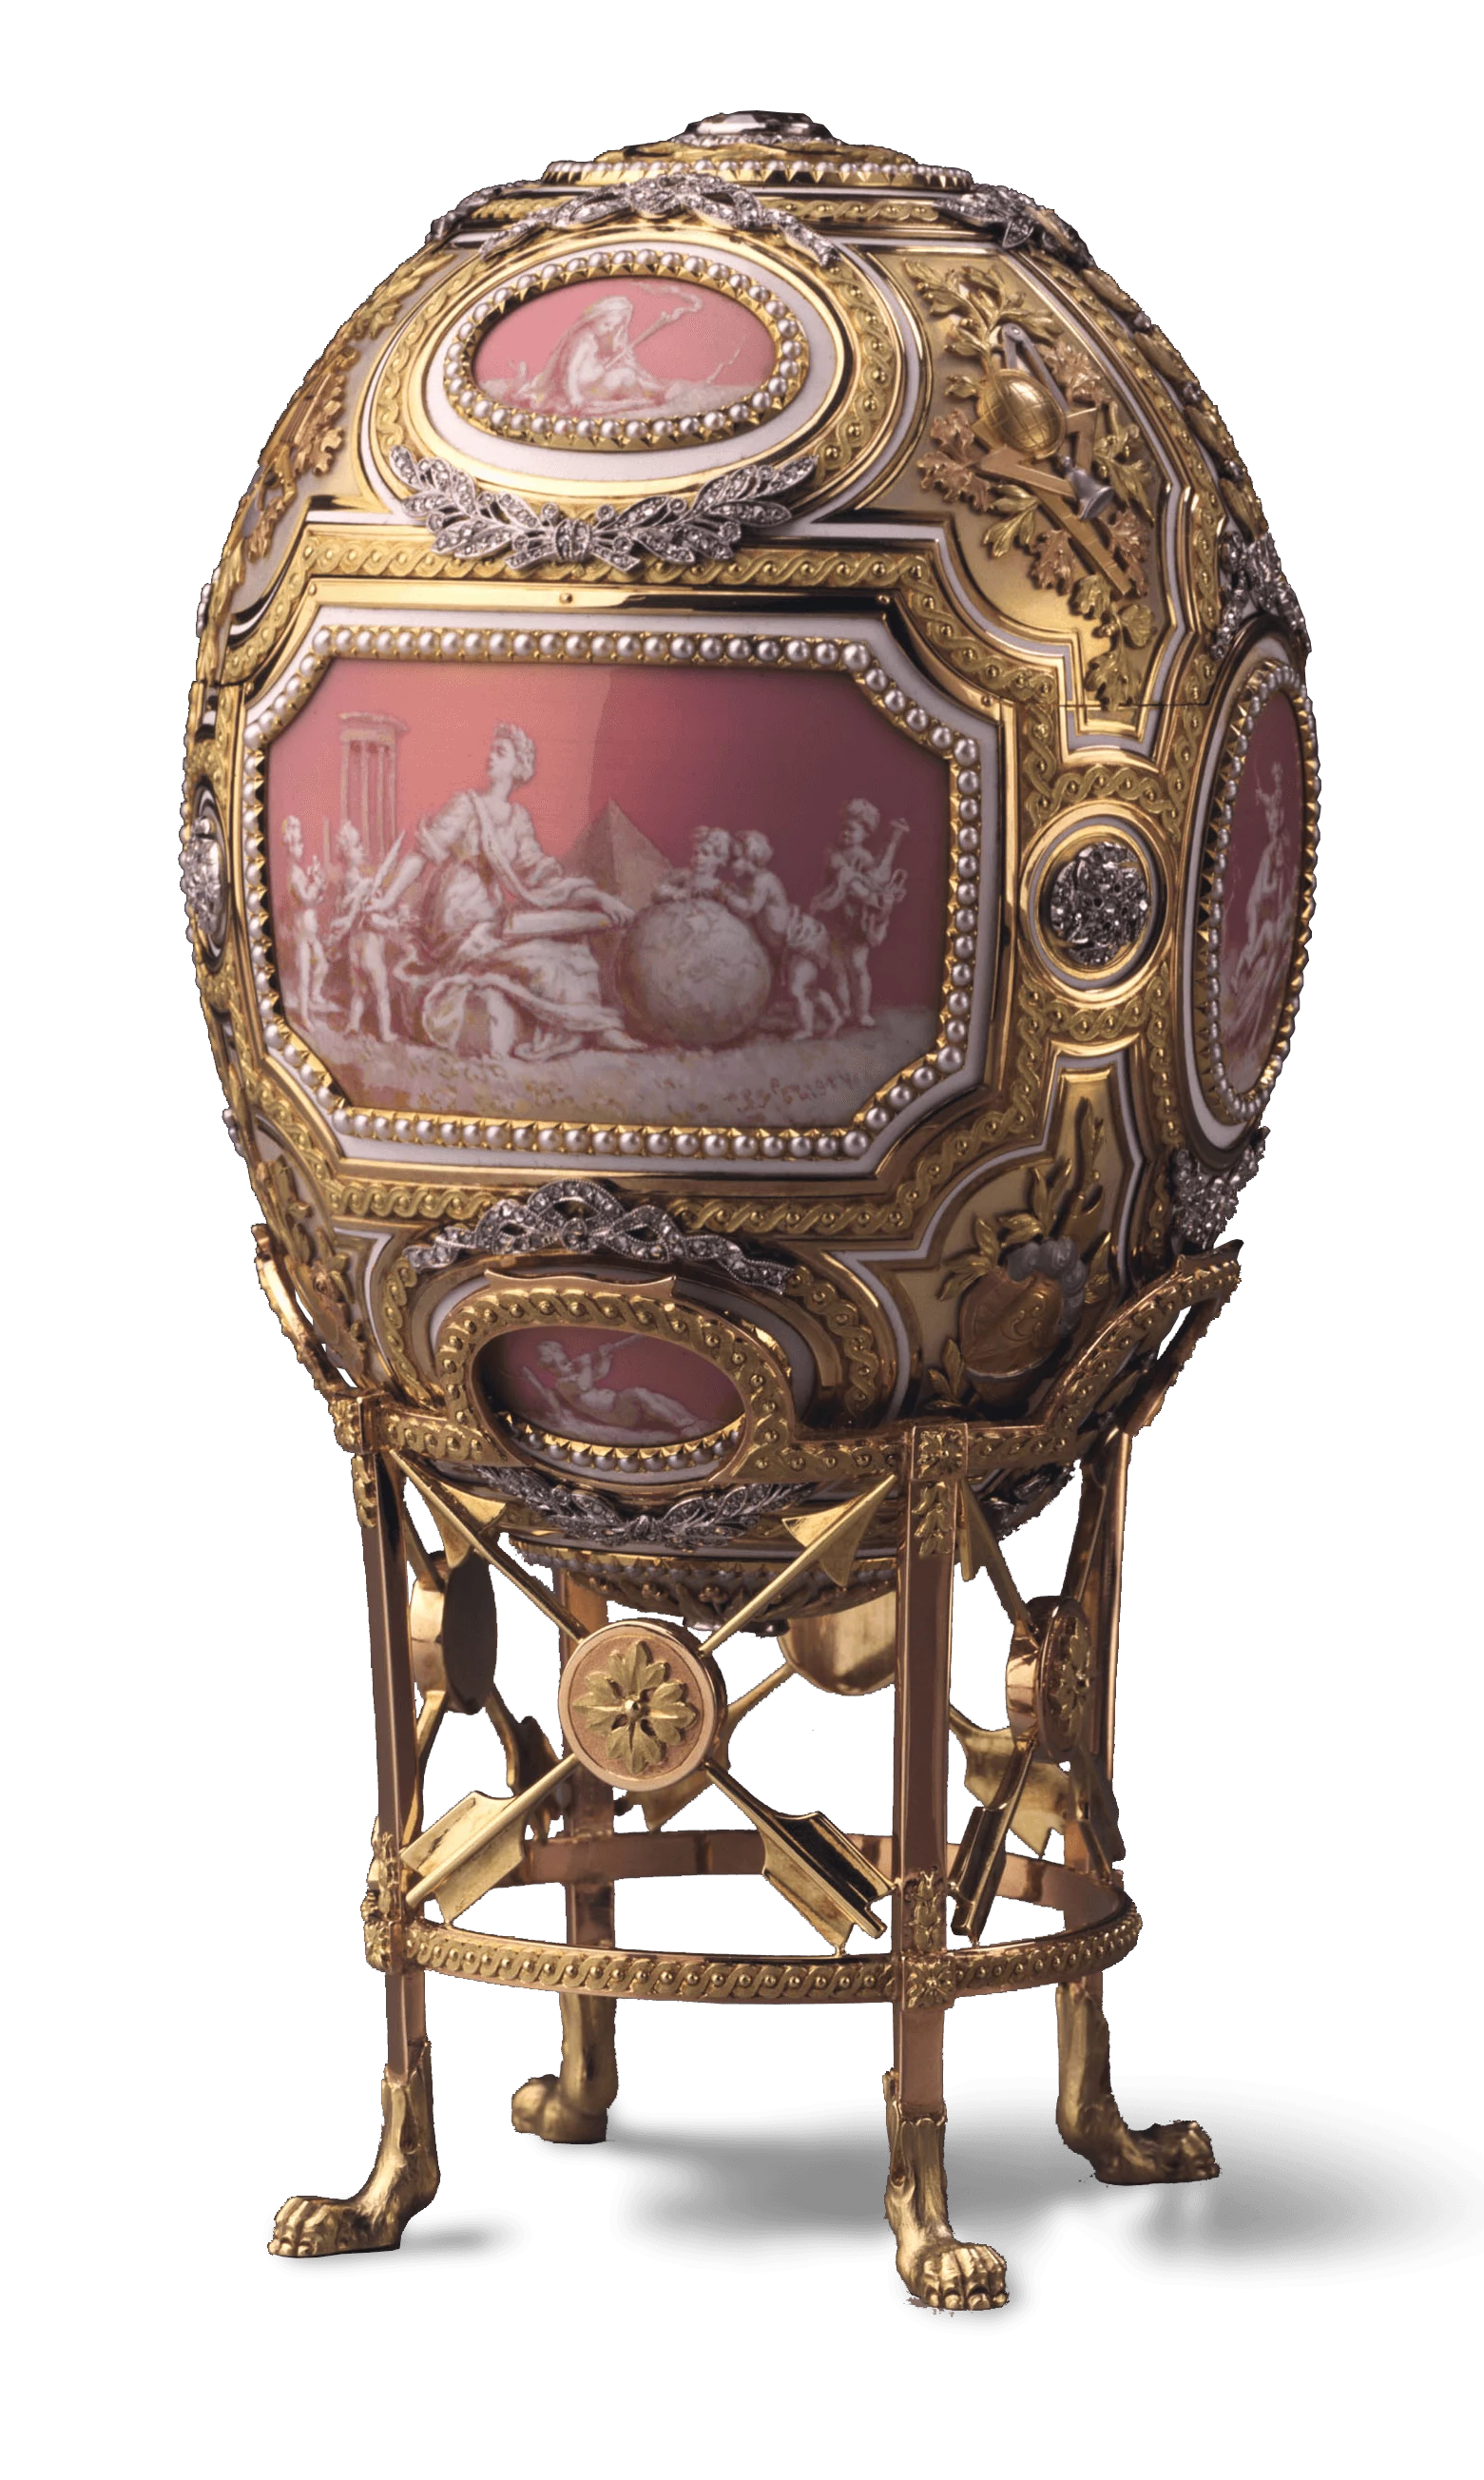 Catherine the Great Egg, Peter Carl Fabergé